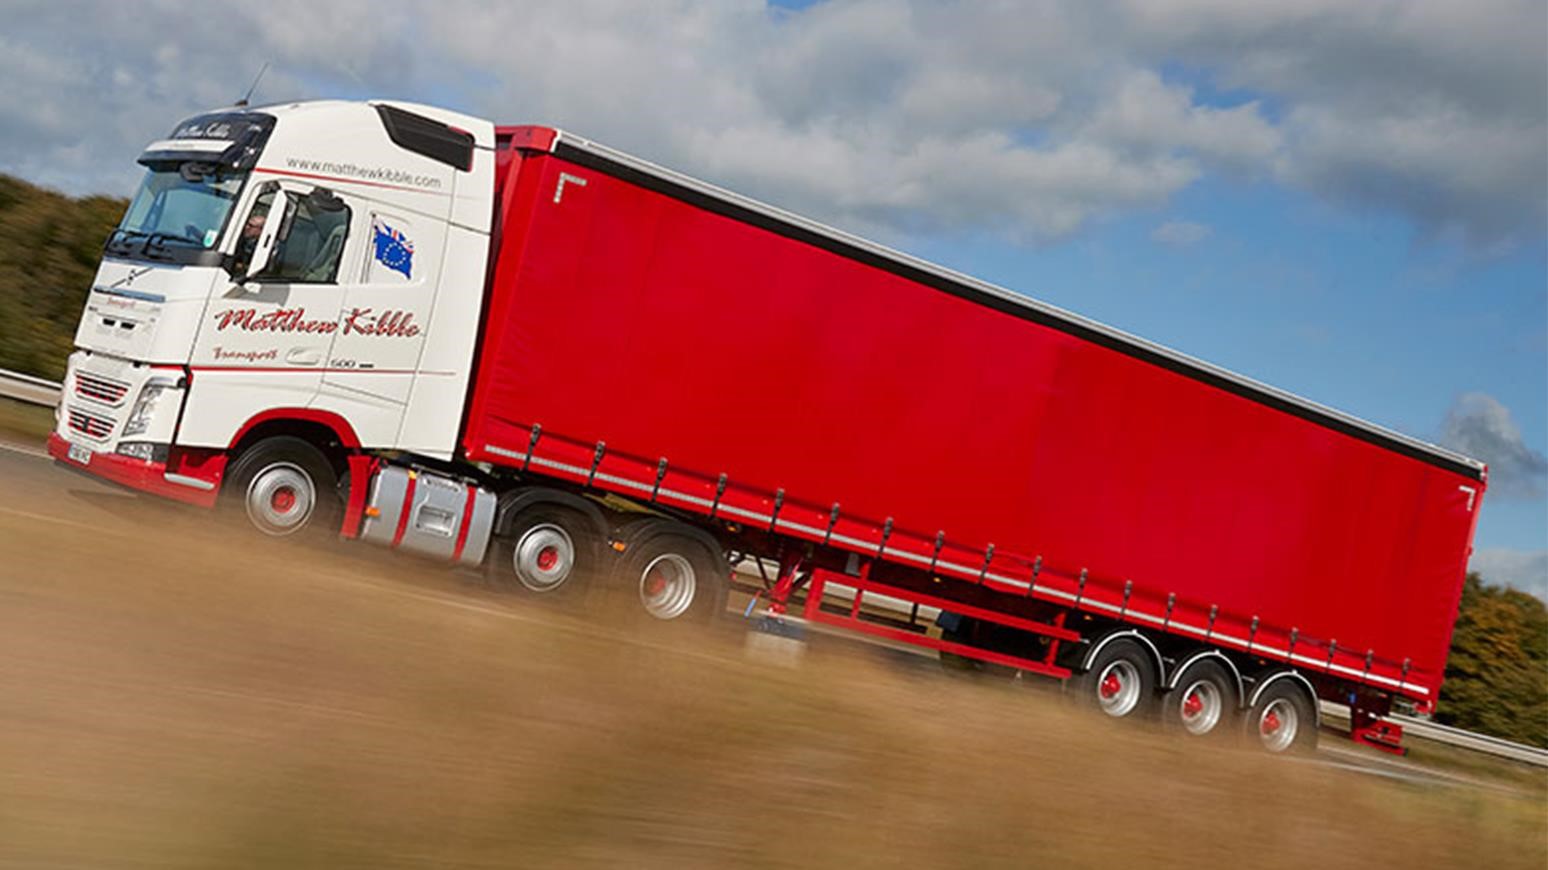 Matthew Kibble Transport Adds SDC Curtainsiders For General Haulage & Pallet-Track Operations